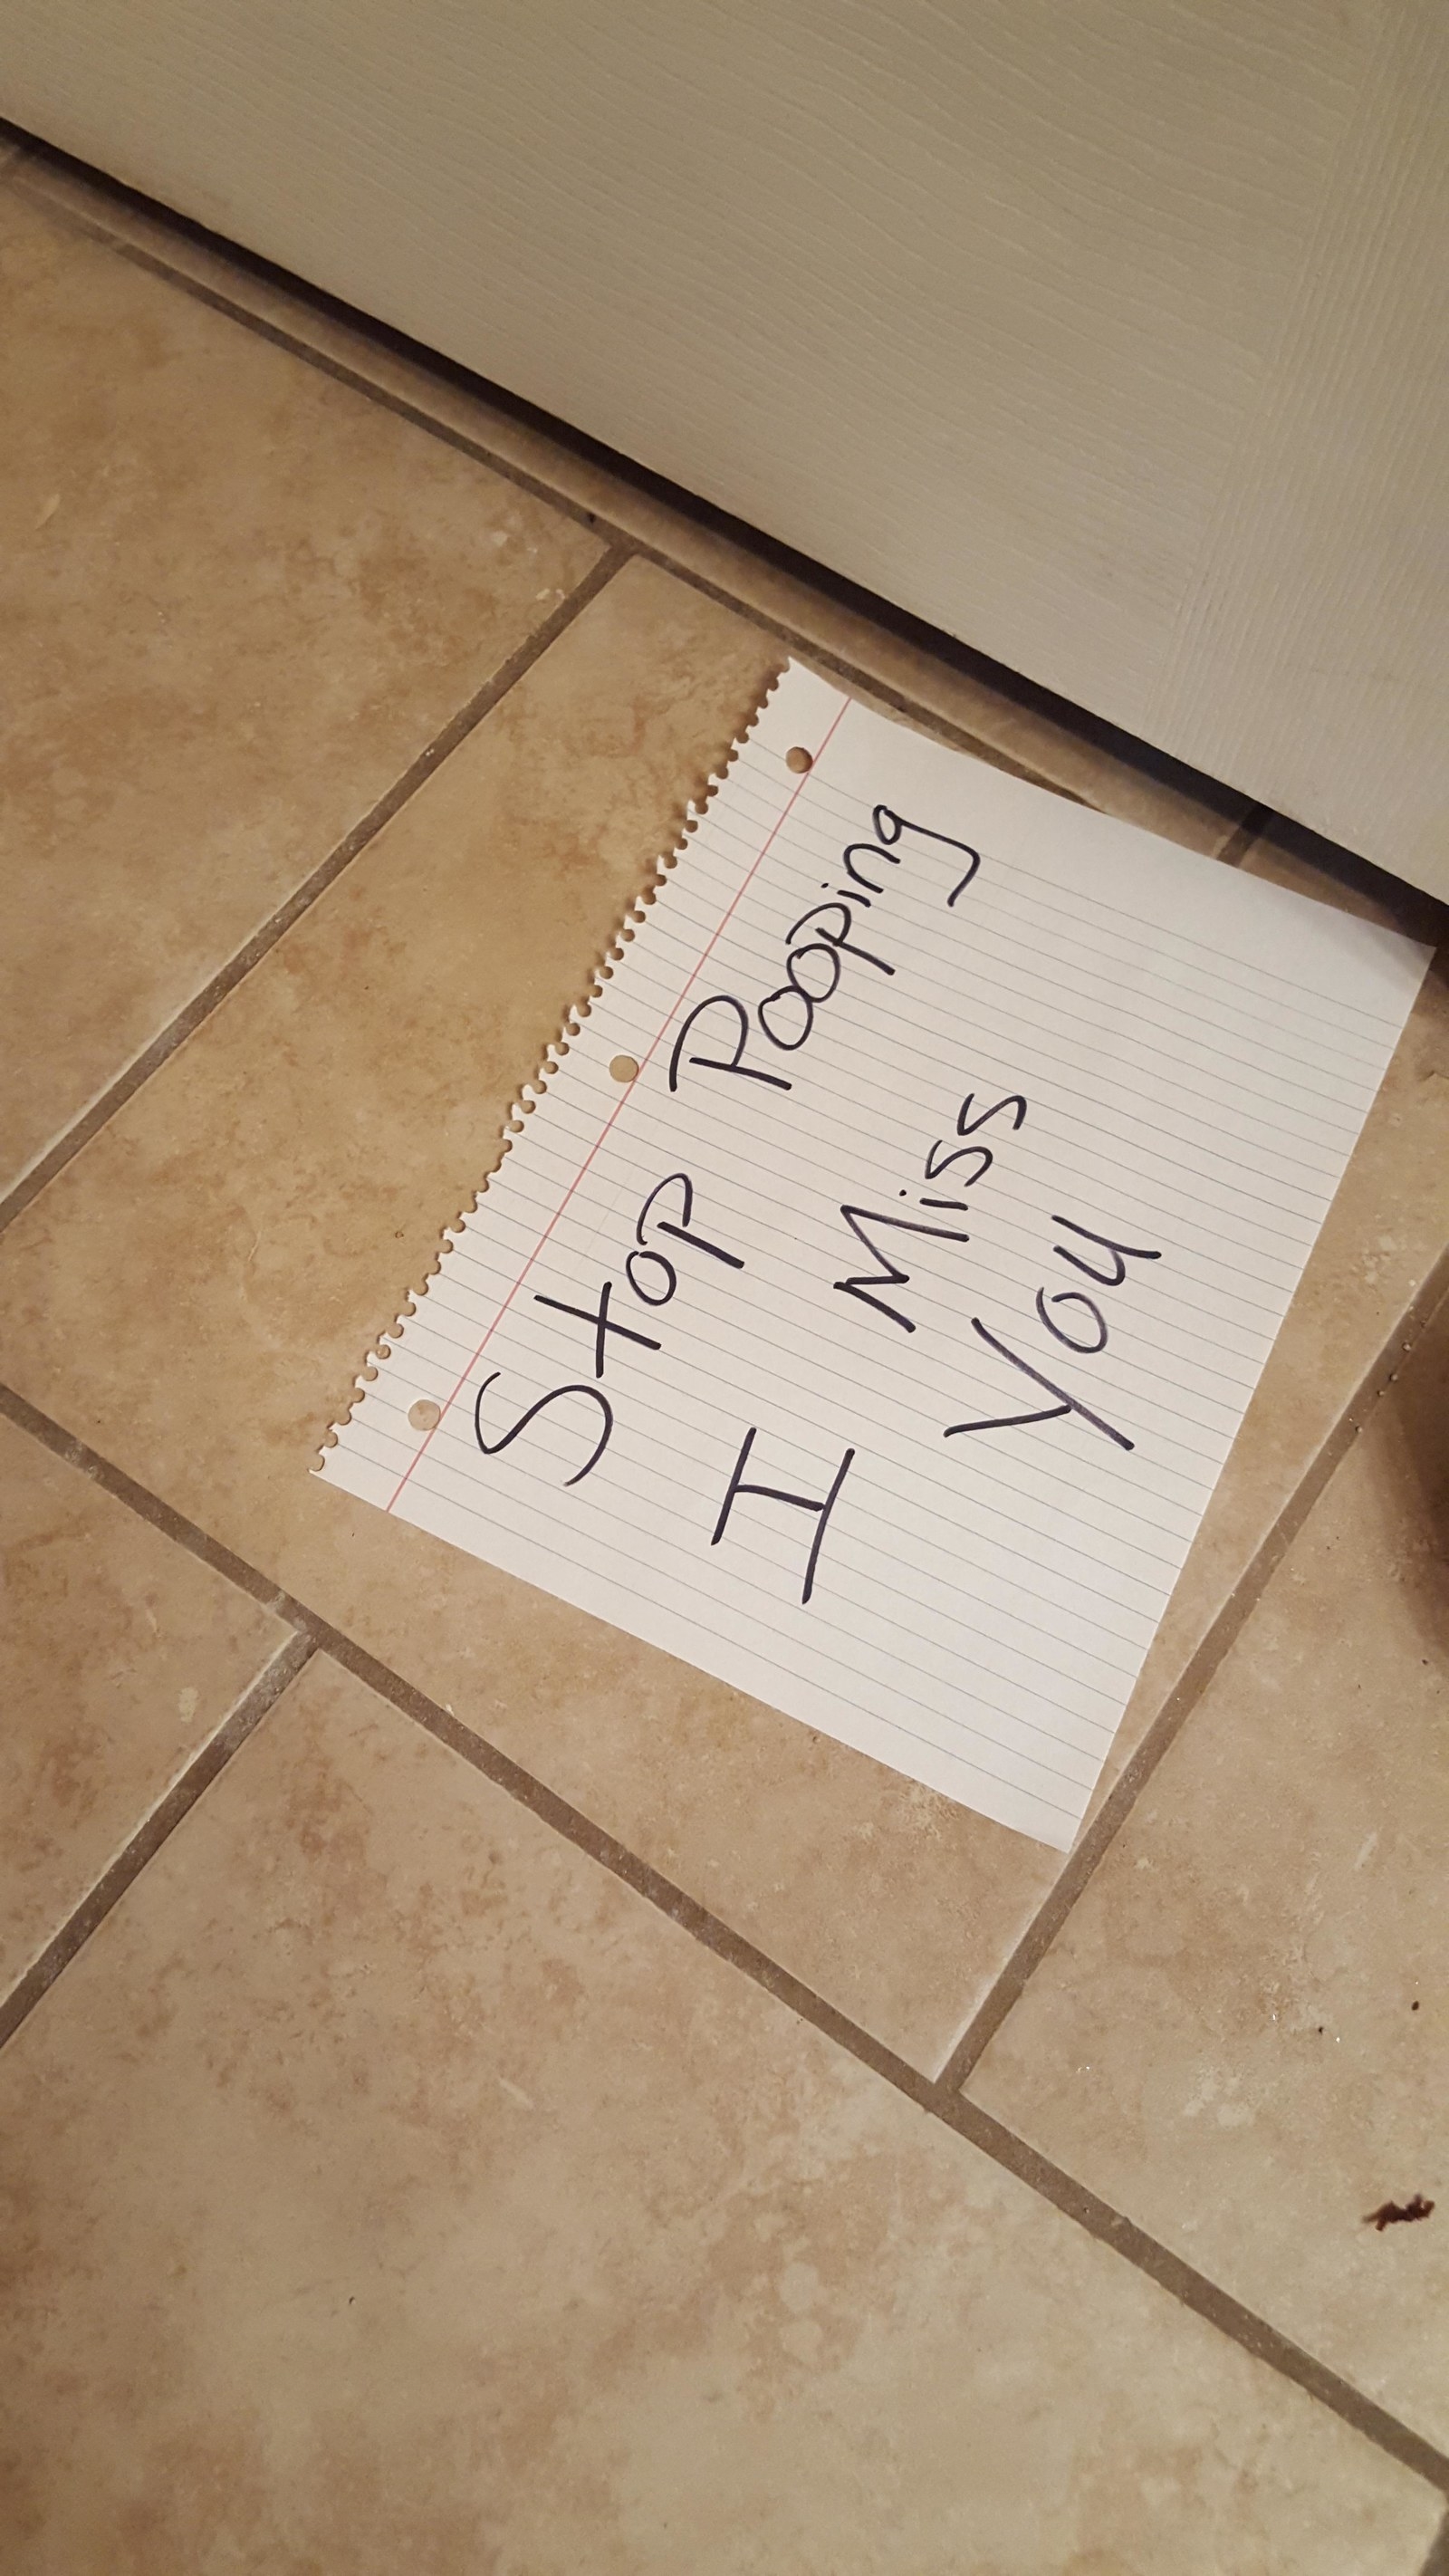 A note slipped under the bathroom door that reads &quot;Stop pooping I miss you&quot;